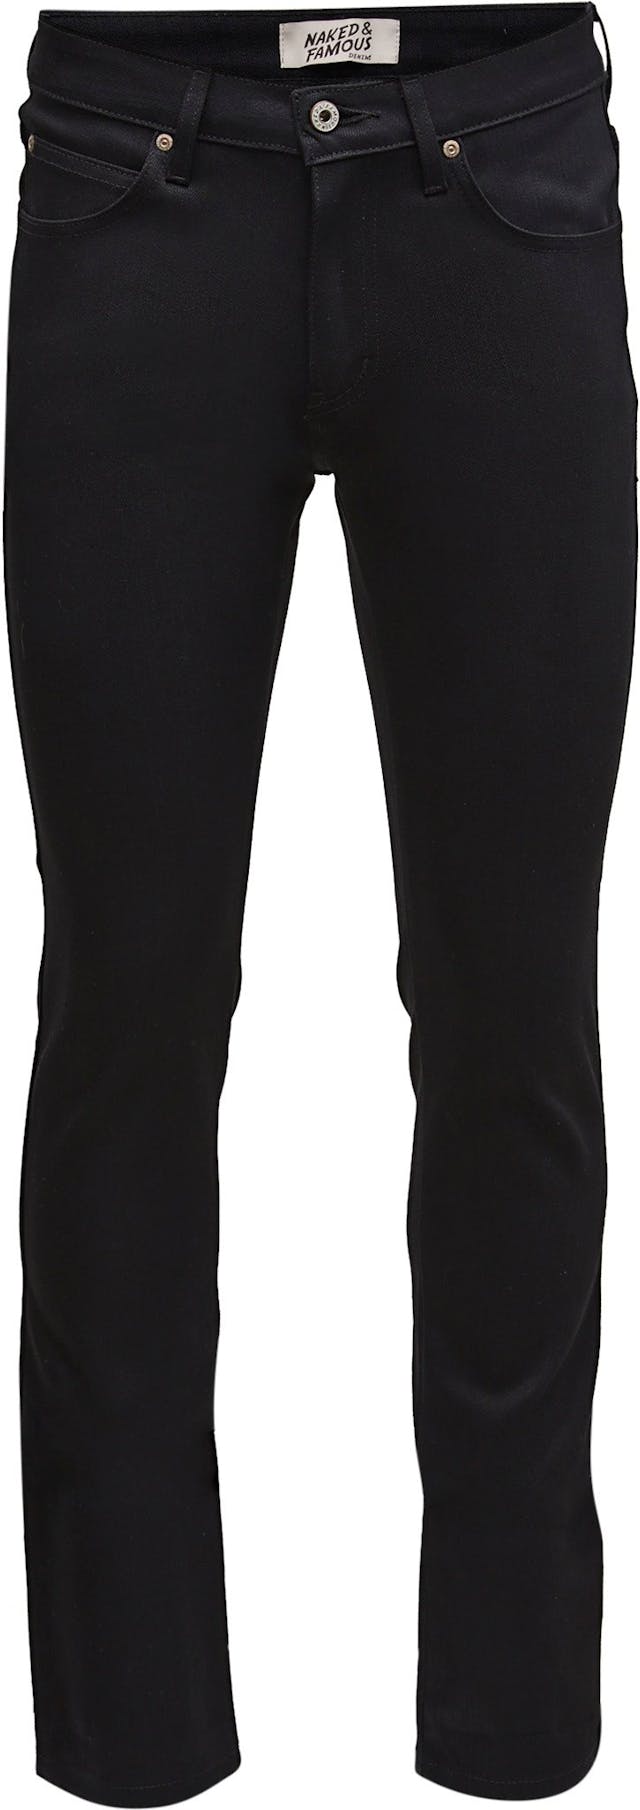 Product image for Skinny Guy Jeans - Black Power Stretch - Men's